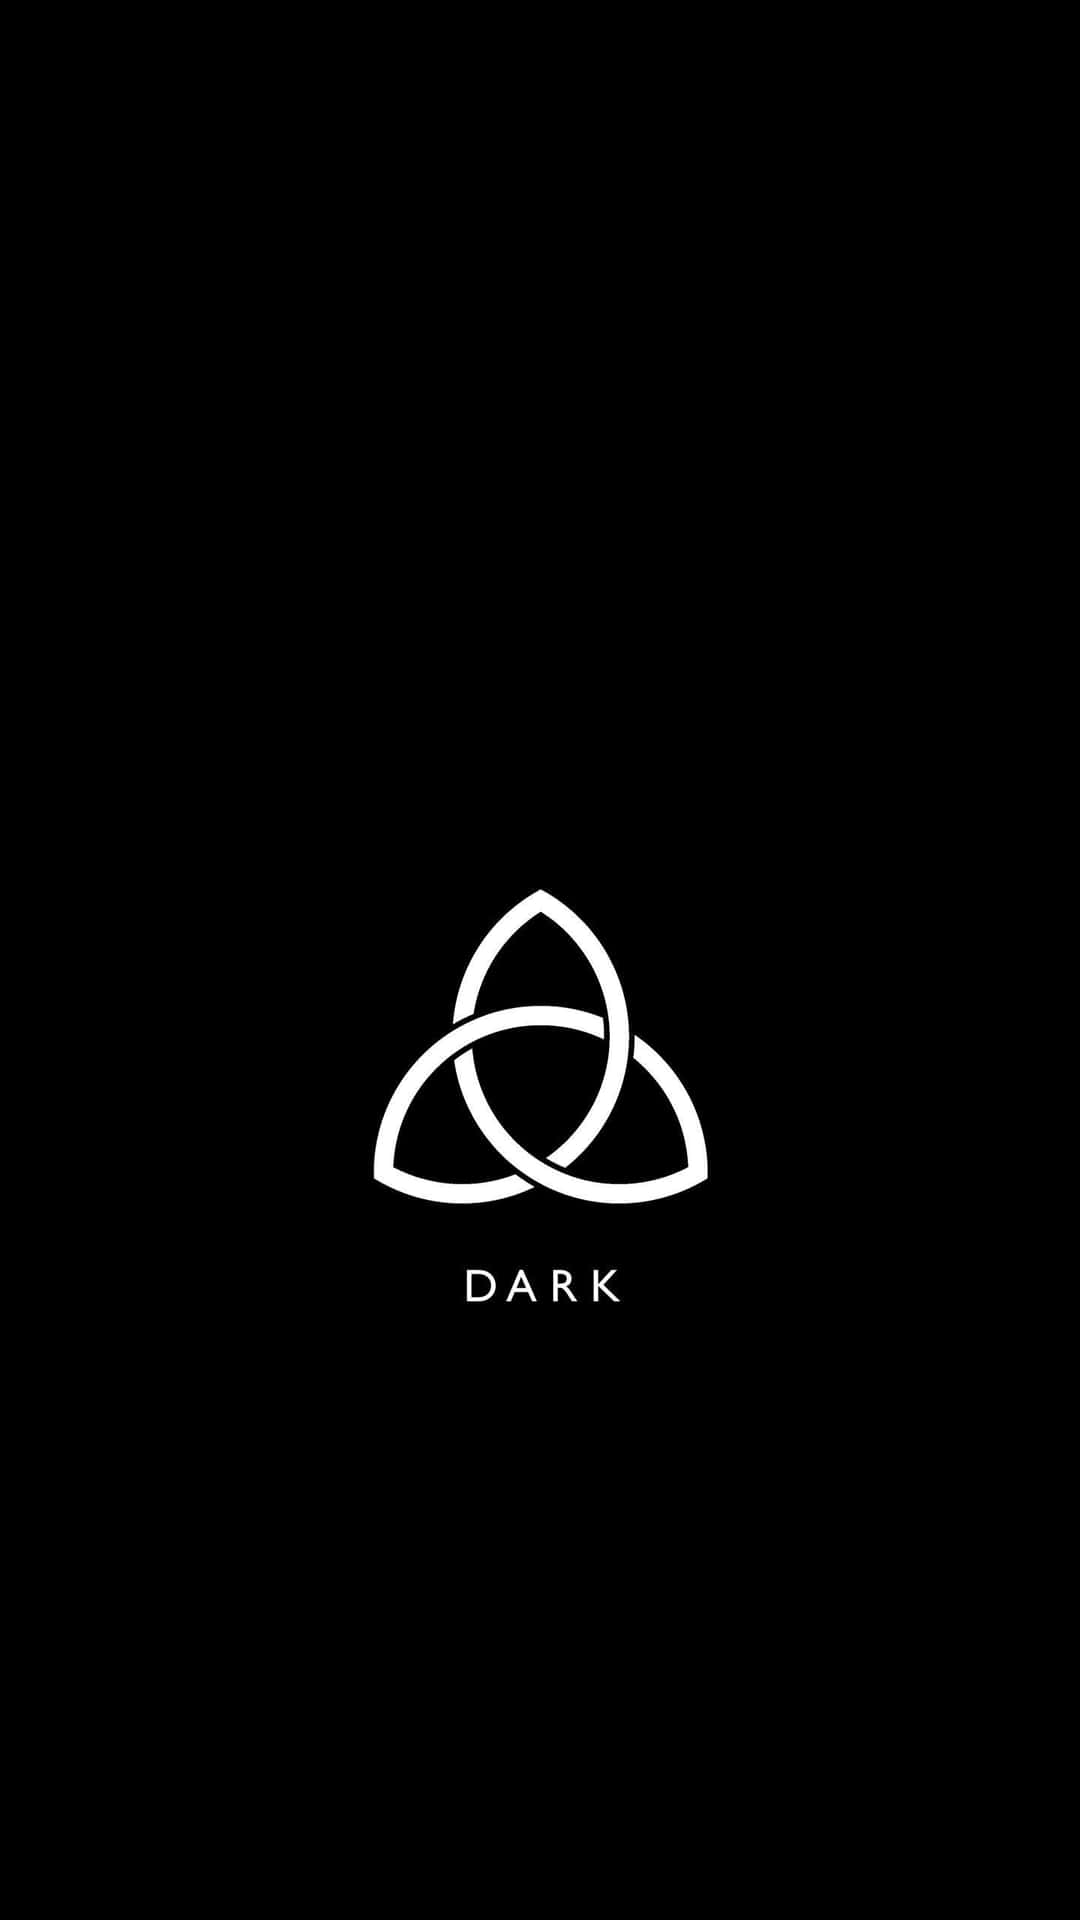 "Unlock the dark secrets of another world with Dark, now streaming on Netflix!" Wallpaper